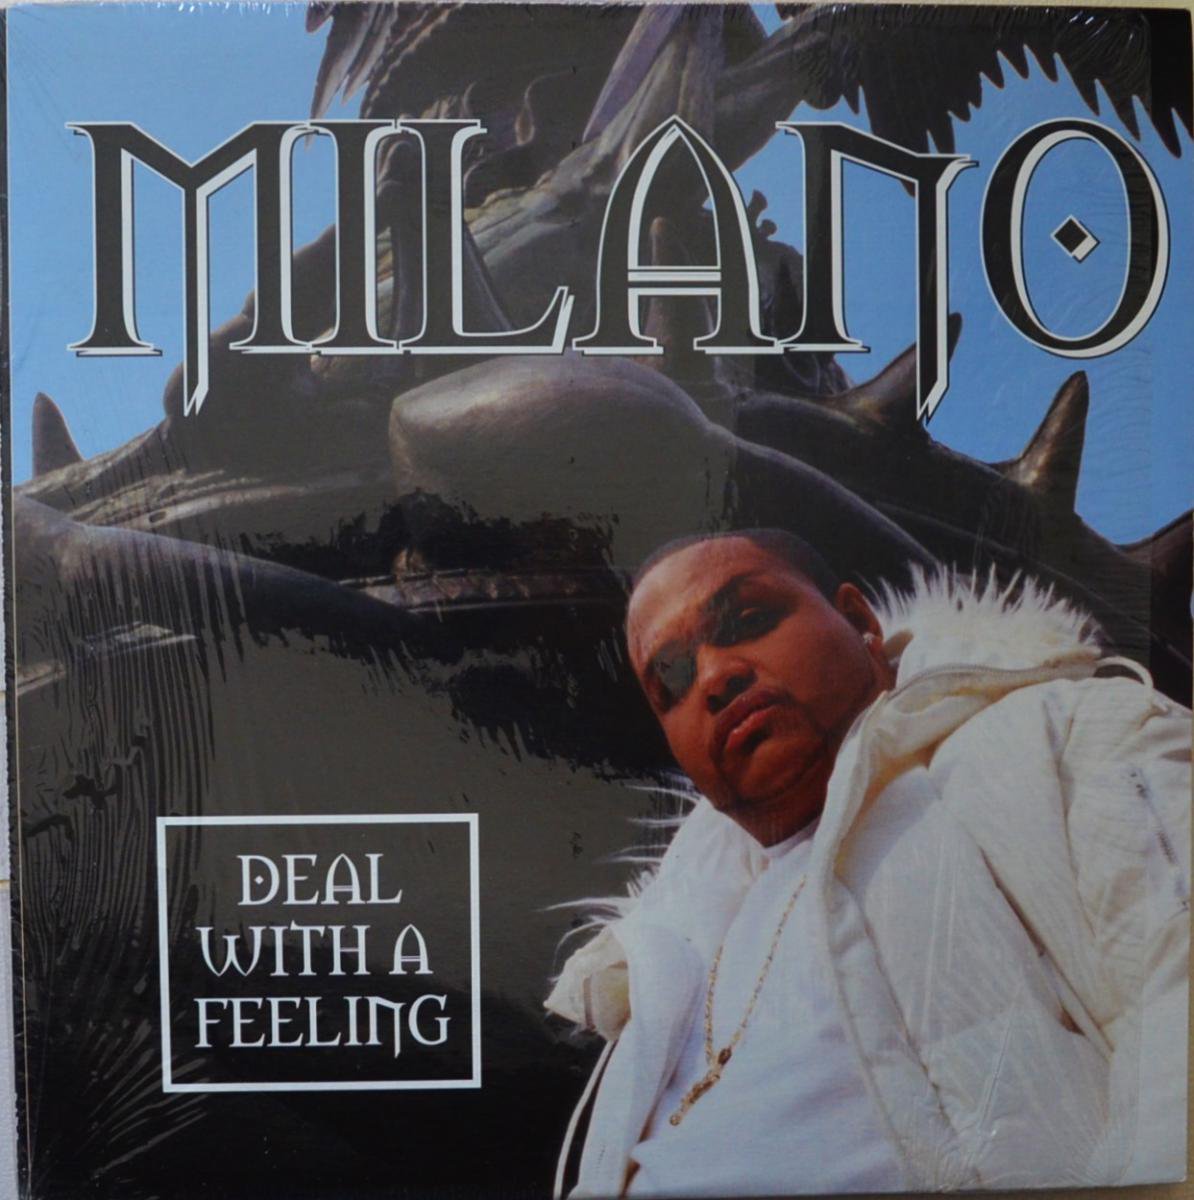 MILANO / DEAL WITH A FEELING (PROD BY SHOW) / REP FOR THE SLUMS (PROD BY AHMED) (12